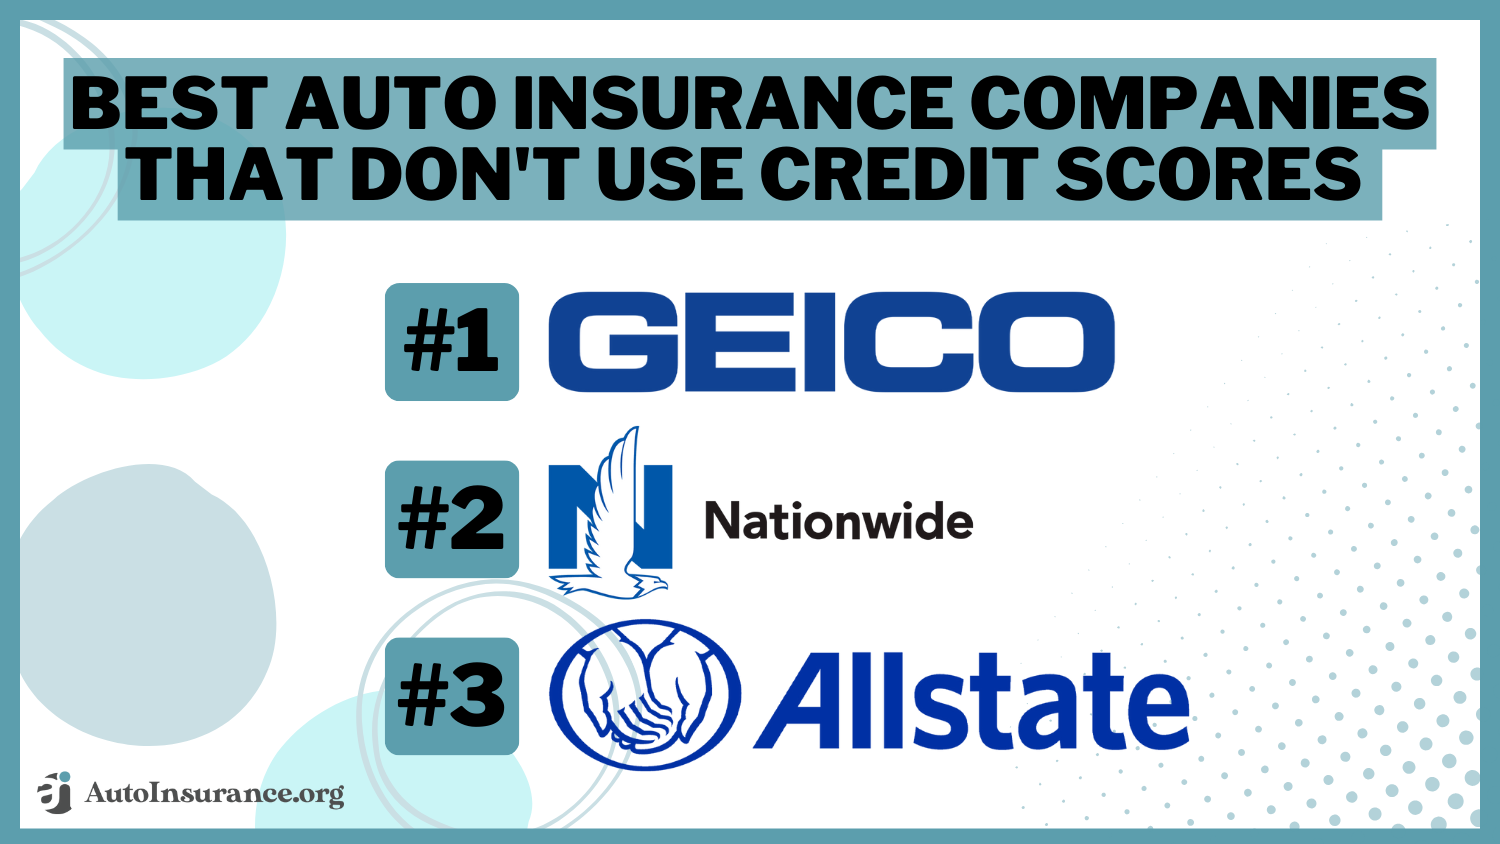 Geico nationwide Allstate Best Auto Insurance Companies That Don't Use Credit Scores